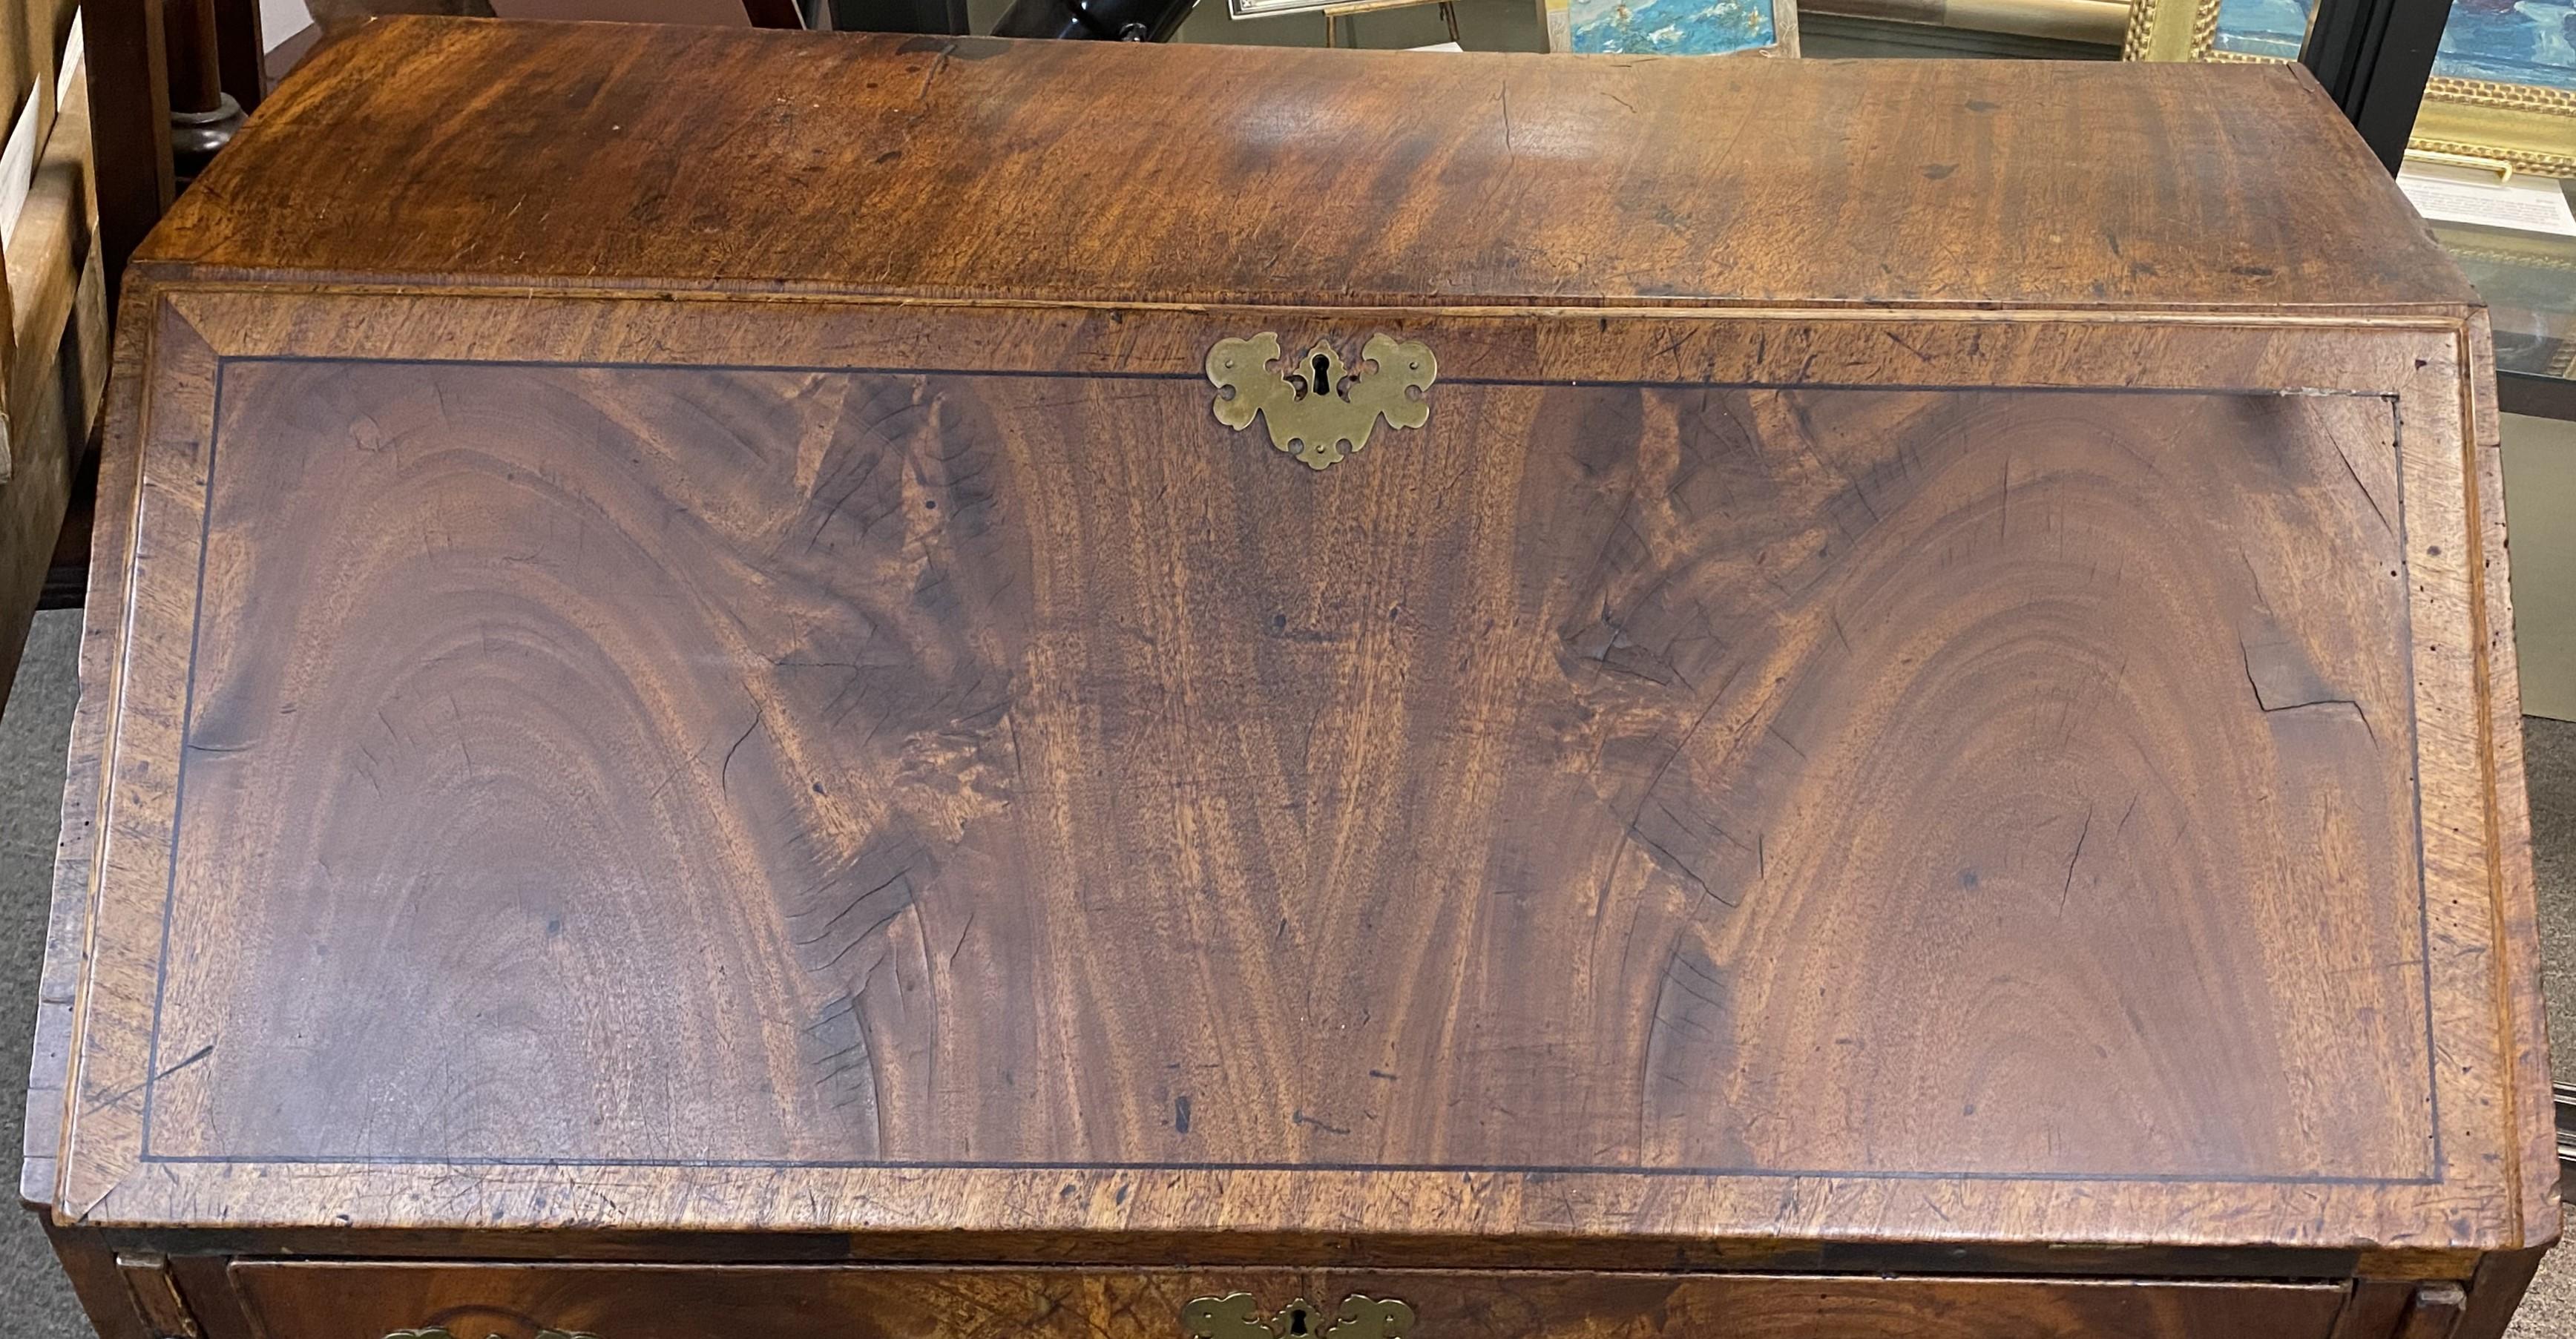 A good example of a Chippendale slant front desk with bookmatched figured mahogany veneers, a slant front which opens to a compartmentalized interior with fitted drawers and cubbies, over four long drawers, each with replaced batwing brasses, all